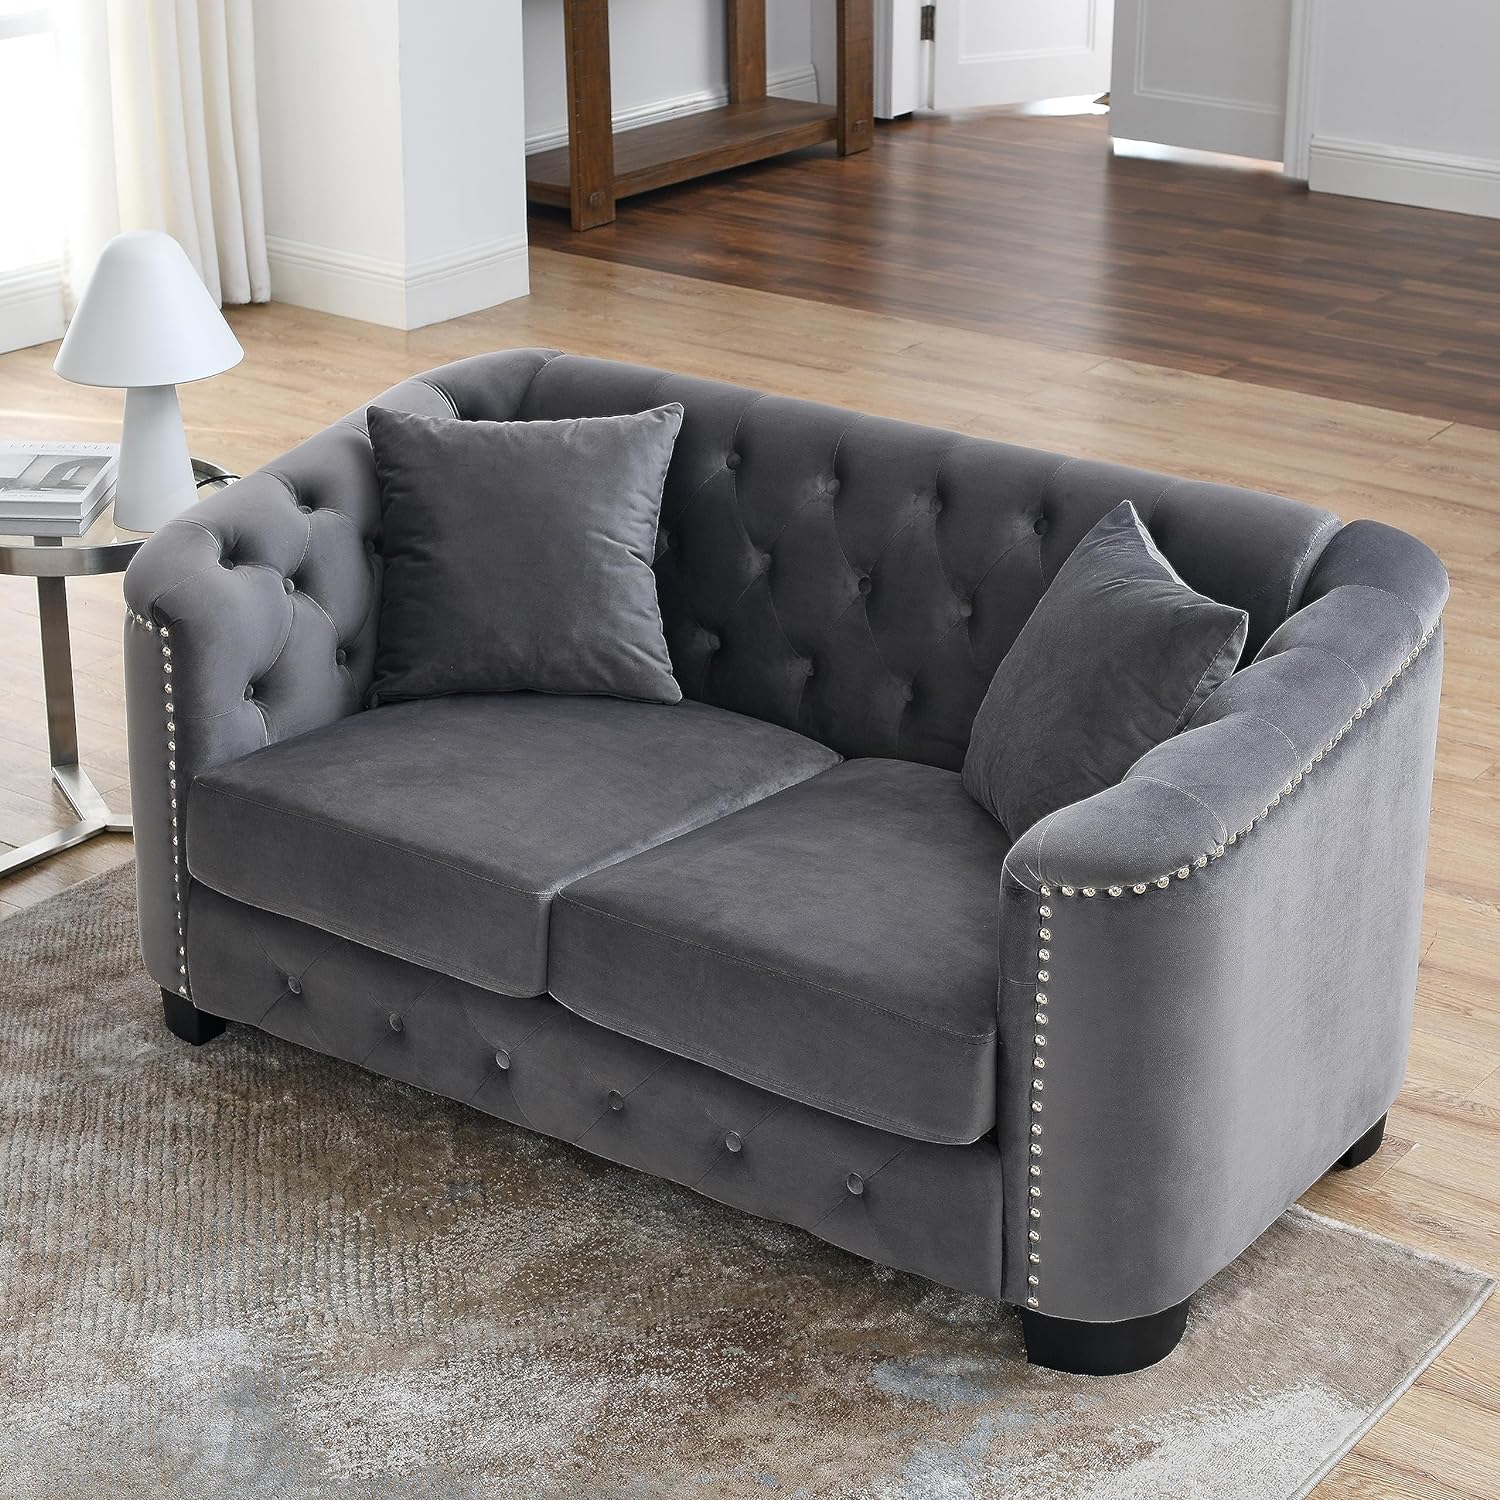 WILLIAMSPACE 59 Velvet Loveseat Sofa Couch for Living Room, Modern Chesterfield Sofa 2-Seater Couch, Upholstered Tufted Backrests with Nailhead Arms and 2 Cushions for Apartment Office (Grey)